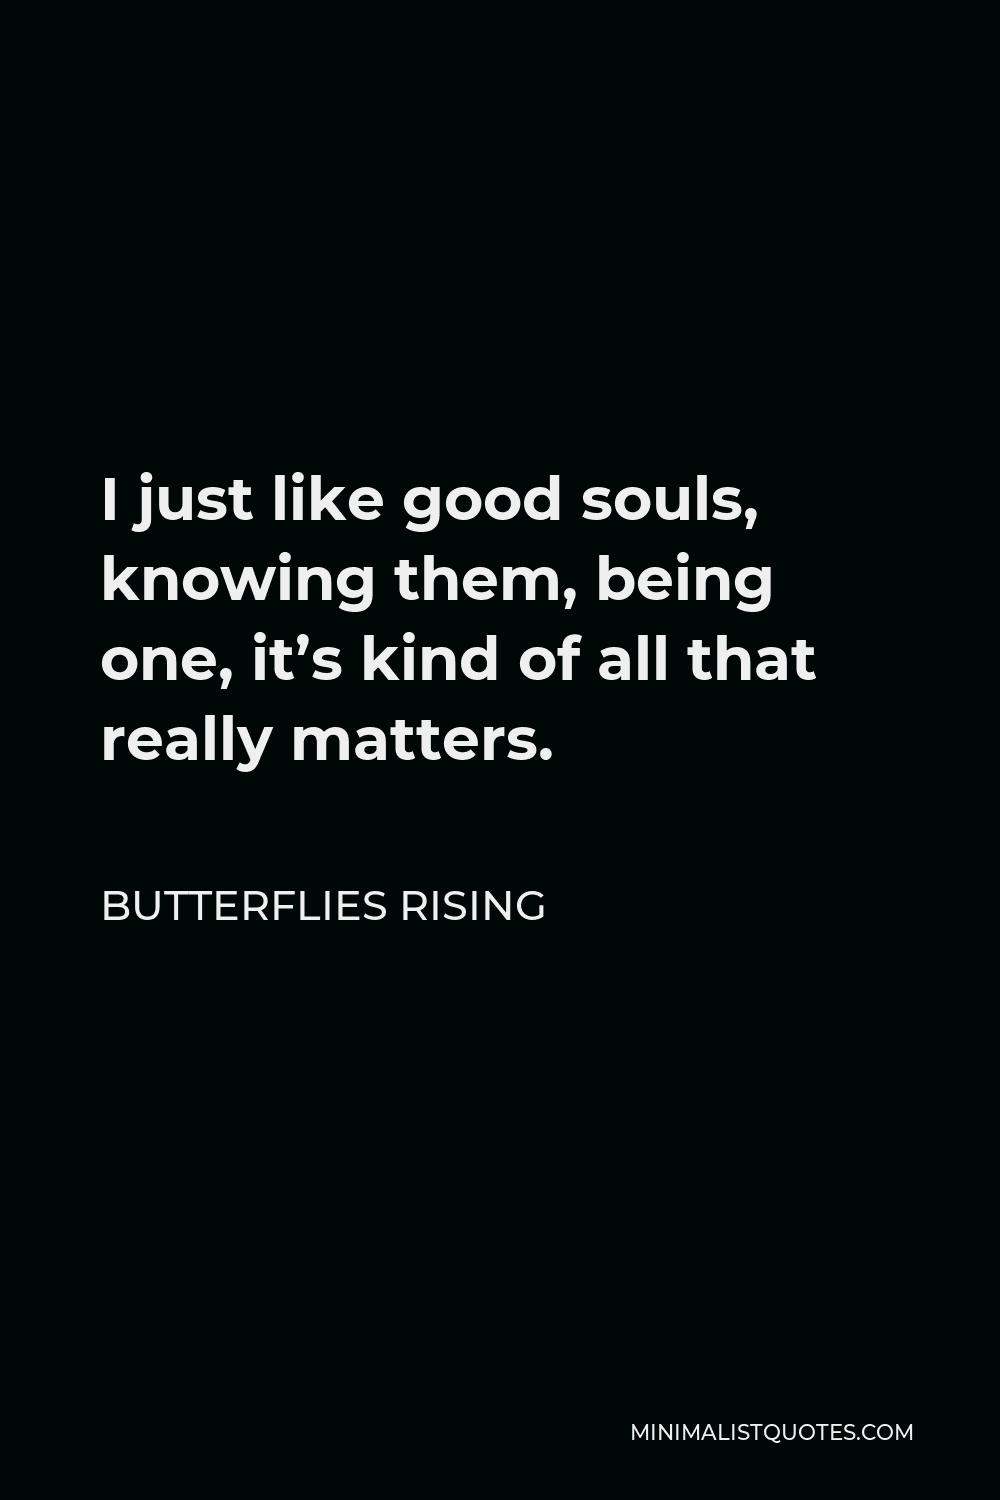 Butterflies Rising Quote - I just like good souls, knowing them, being one, it’s kind of all that really matters.